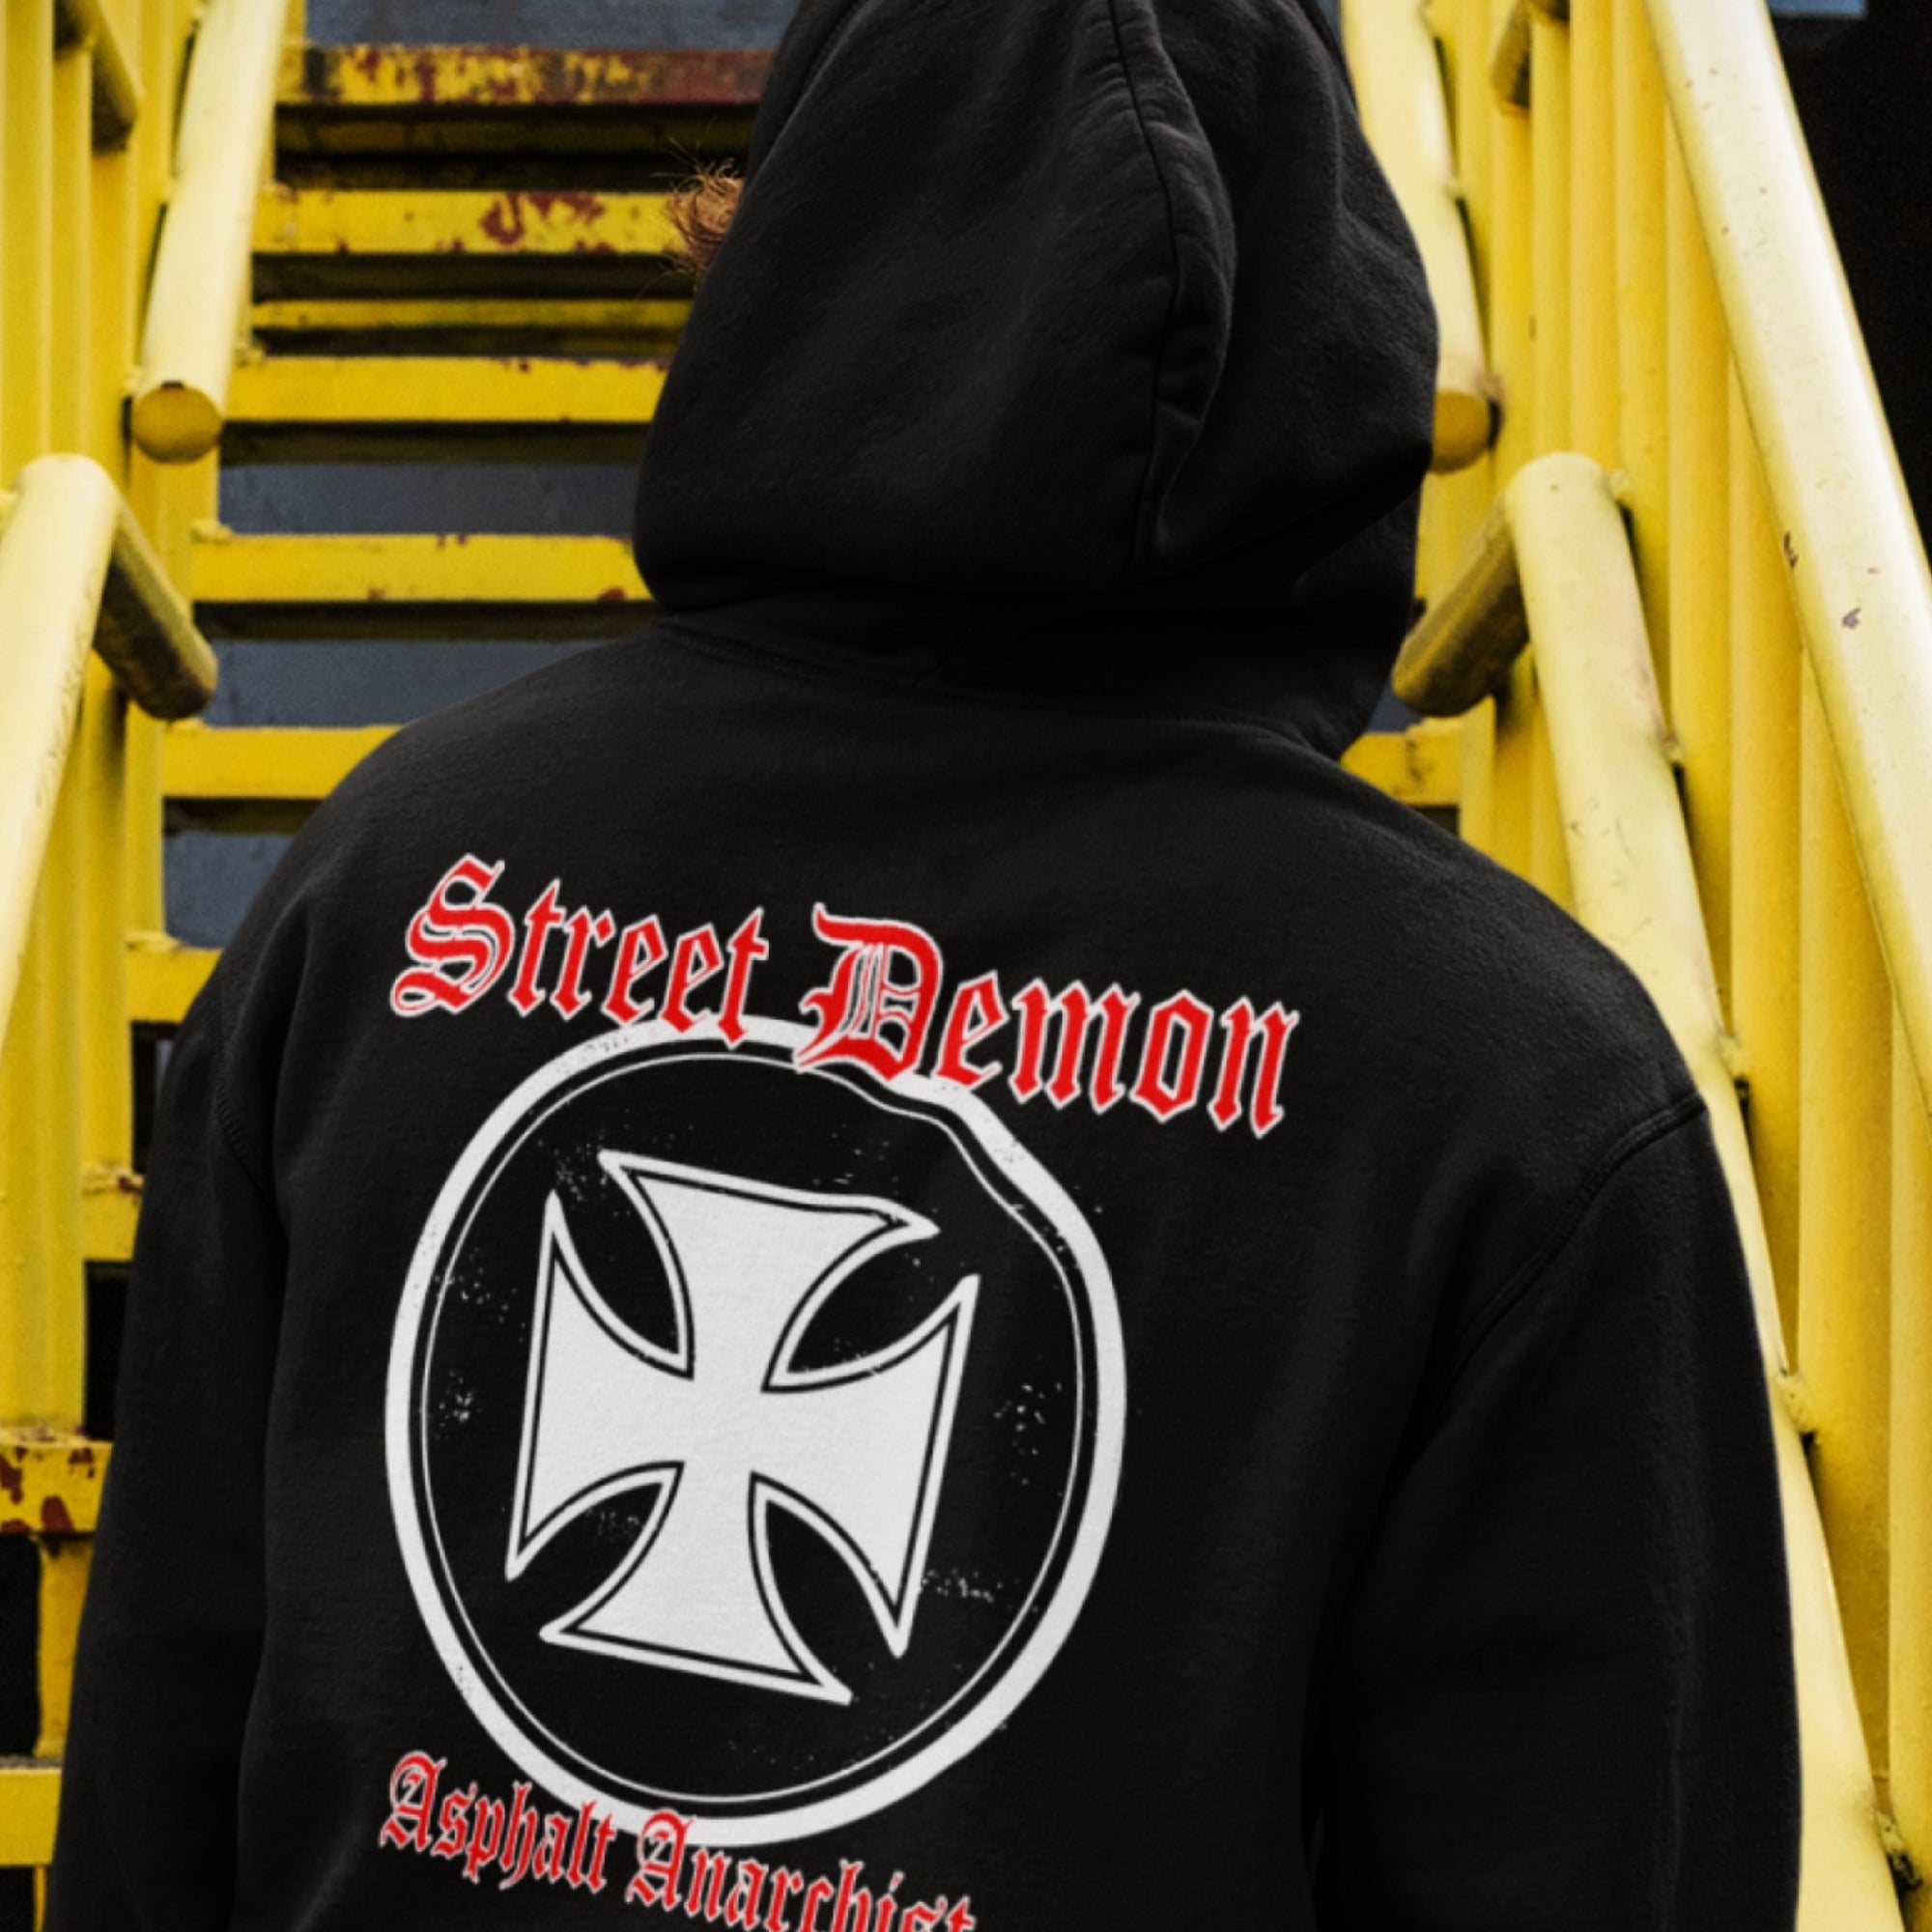 A young hooligan walks up a metal stairway to the elevated train. He is wearing the Street Demon Hoodie from Asphalt Anarchist Clothing Co. KUSTOM KULTURE APPAREL & PRODUCTS - Fuck the Status Quo